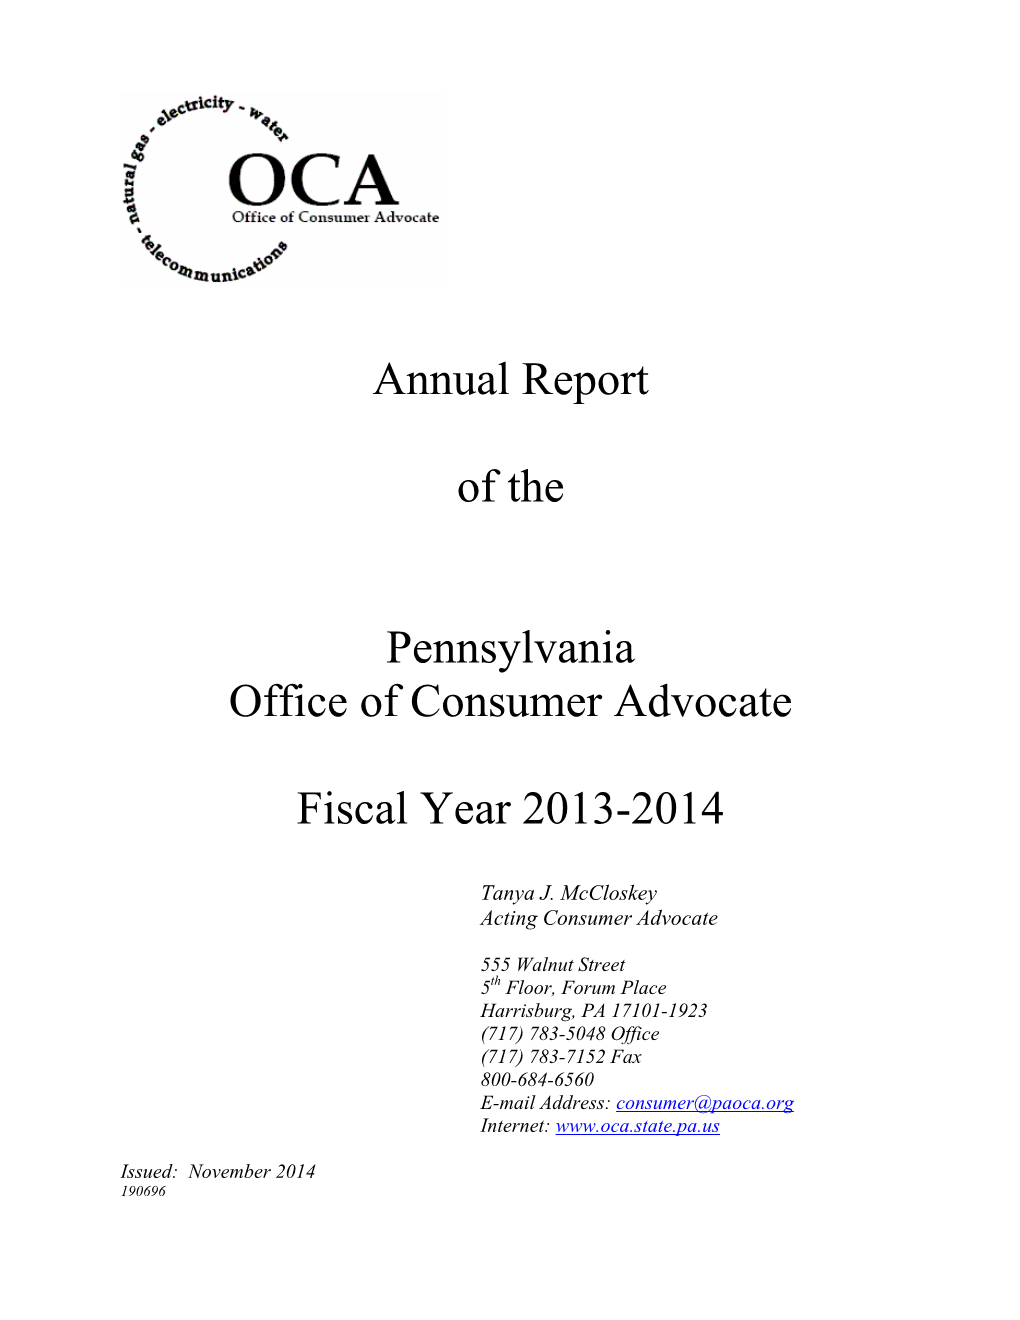 Annual Report of the Pennsylvania Office of Consumer Advocate Fiscal